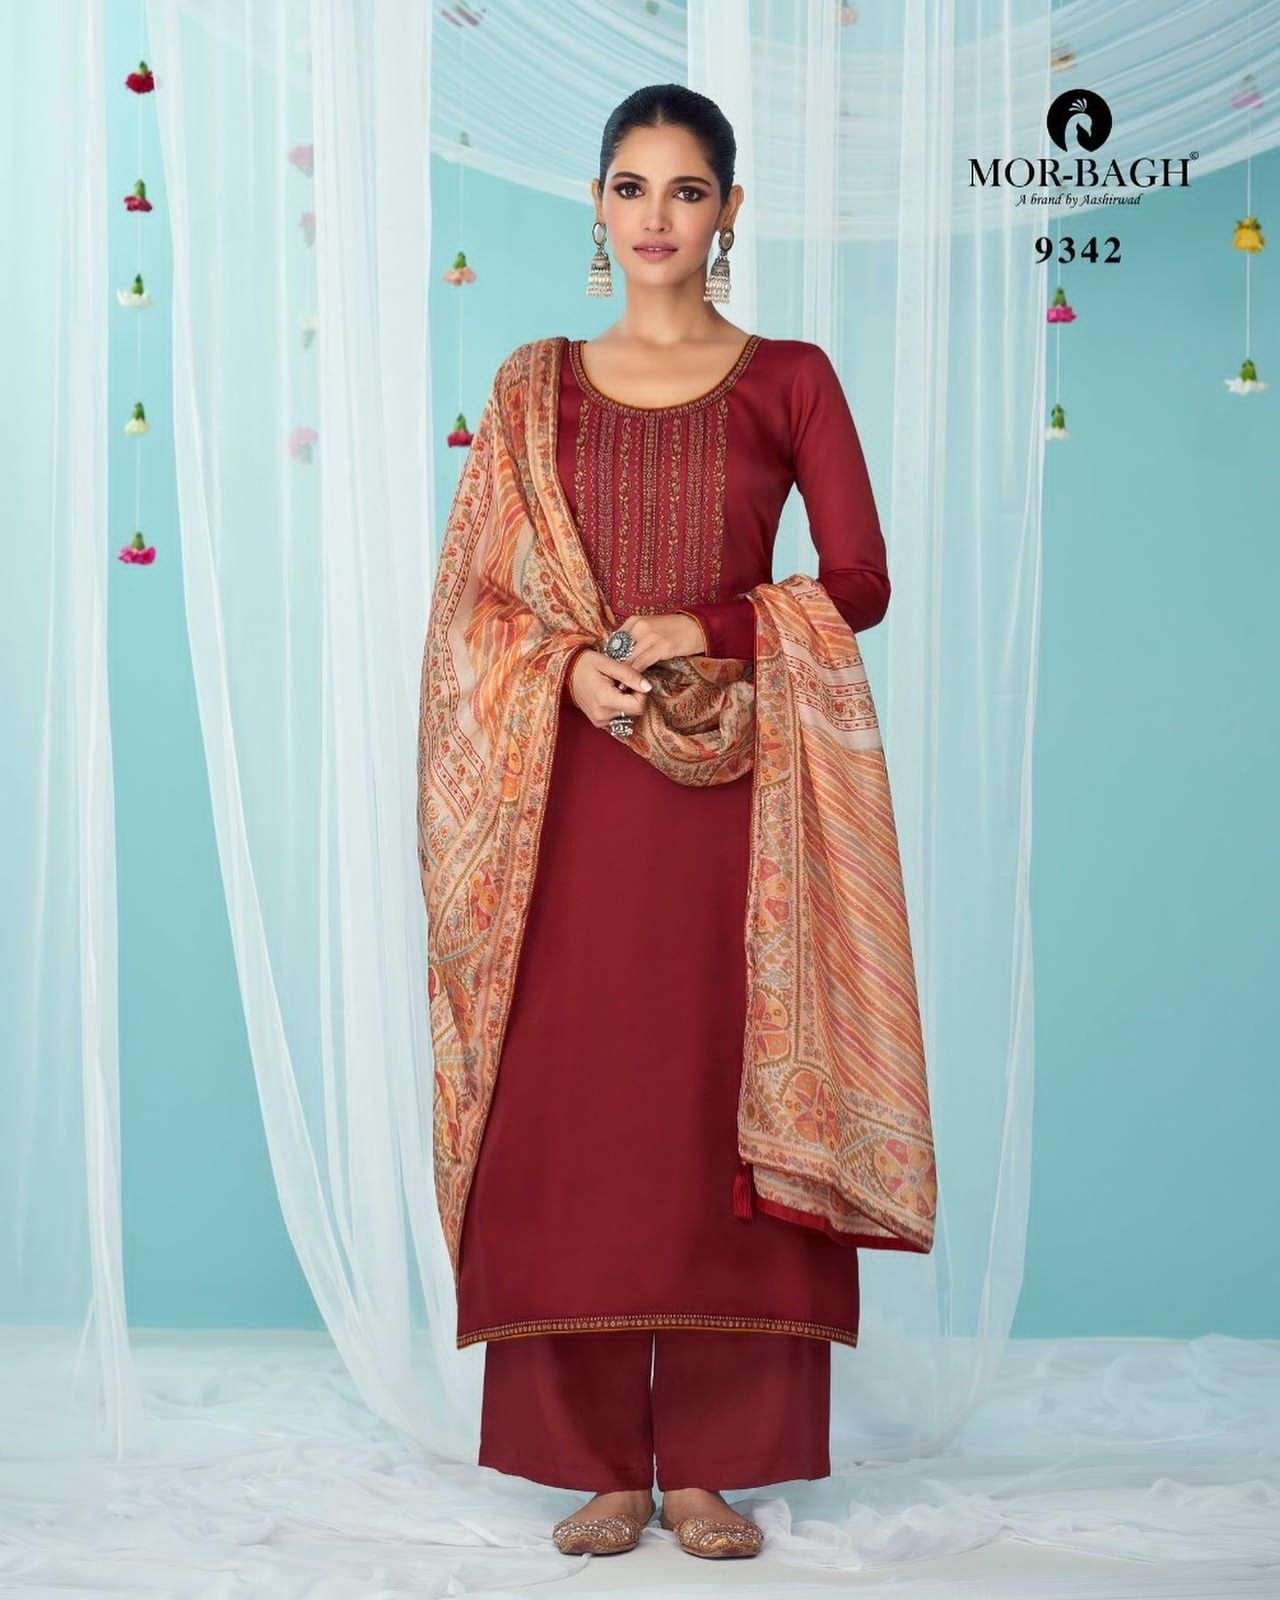 MOR BAGH PRESENT VICTORIA SEMI STITCHED STRAIGHT LONG INDIAN DESIGNER SALWAR SUITS IN WHOLESALE RATE IN SURAT - SAIDHARANX 